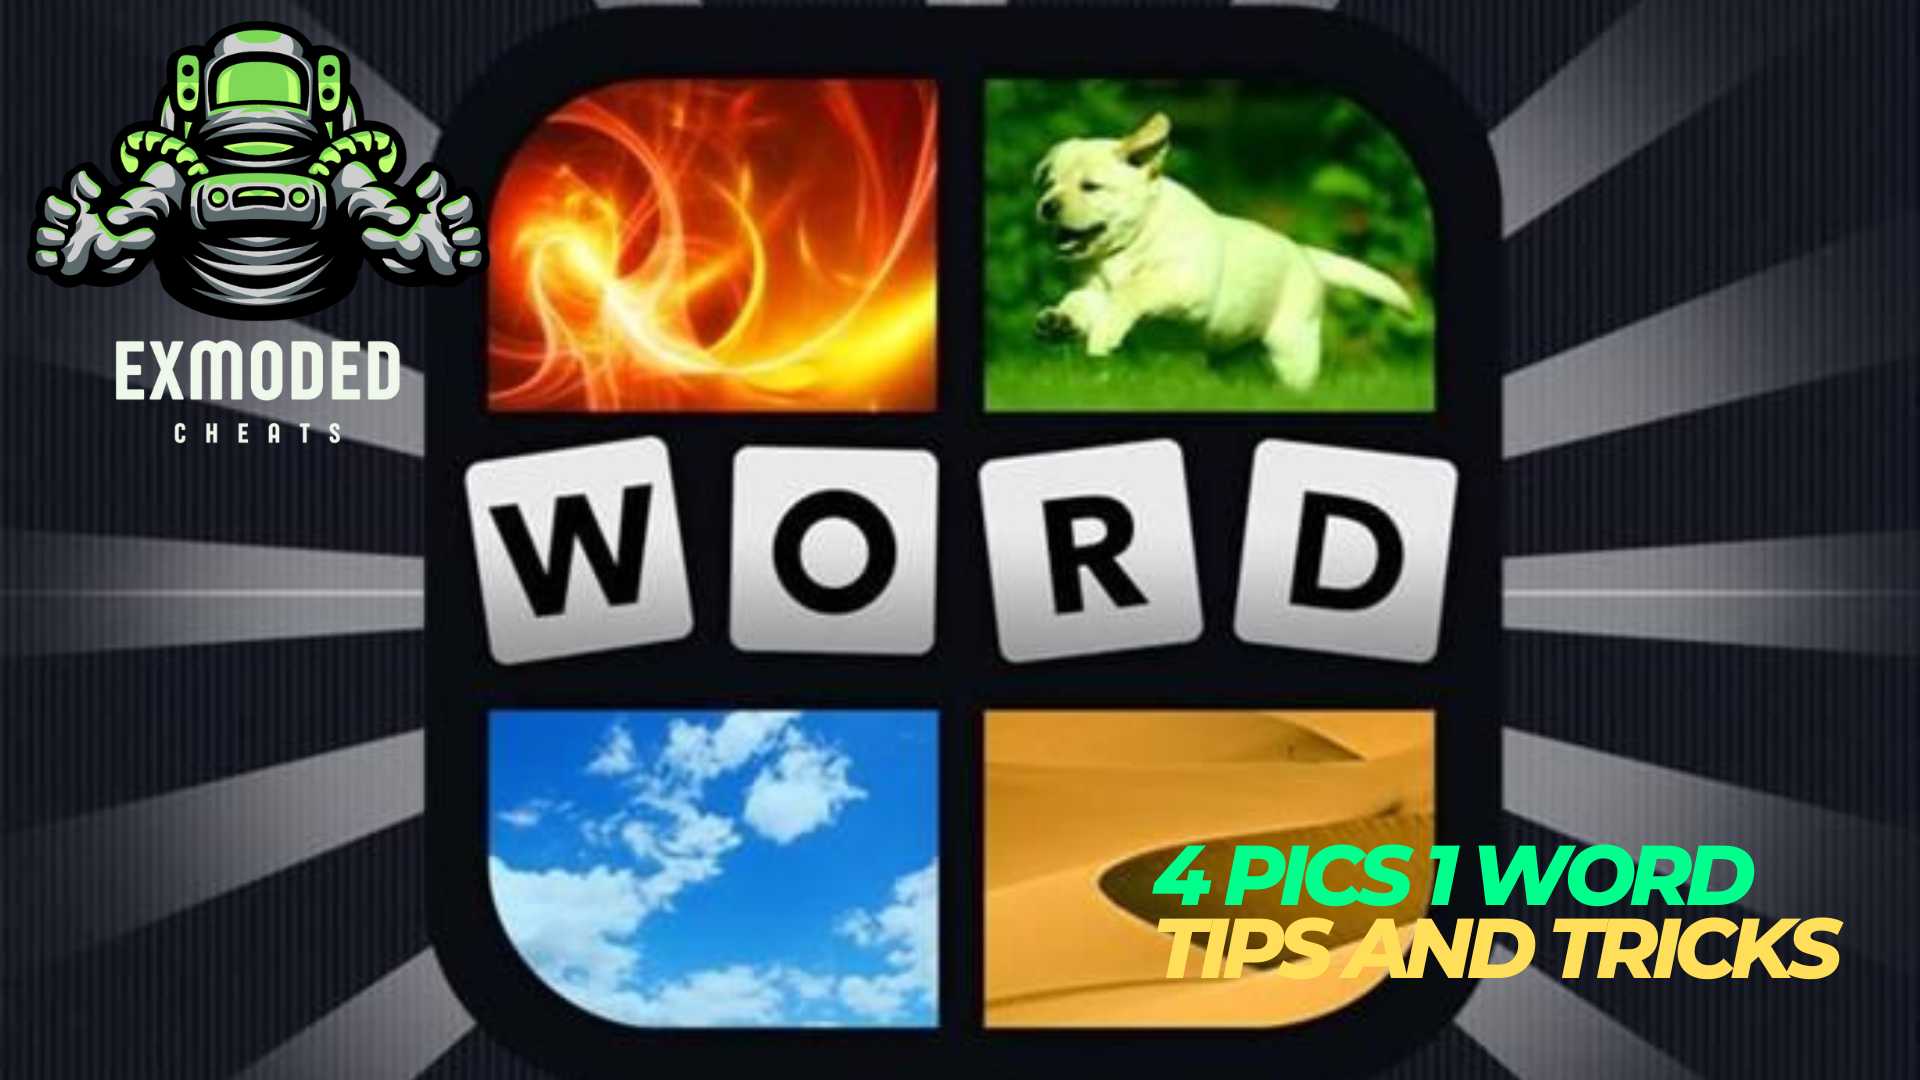 4 Pics 1 Word tips and tricks